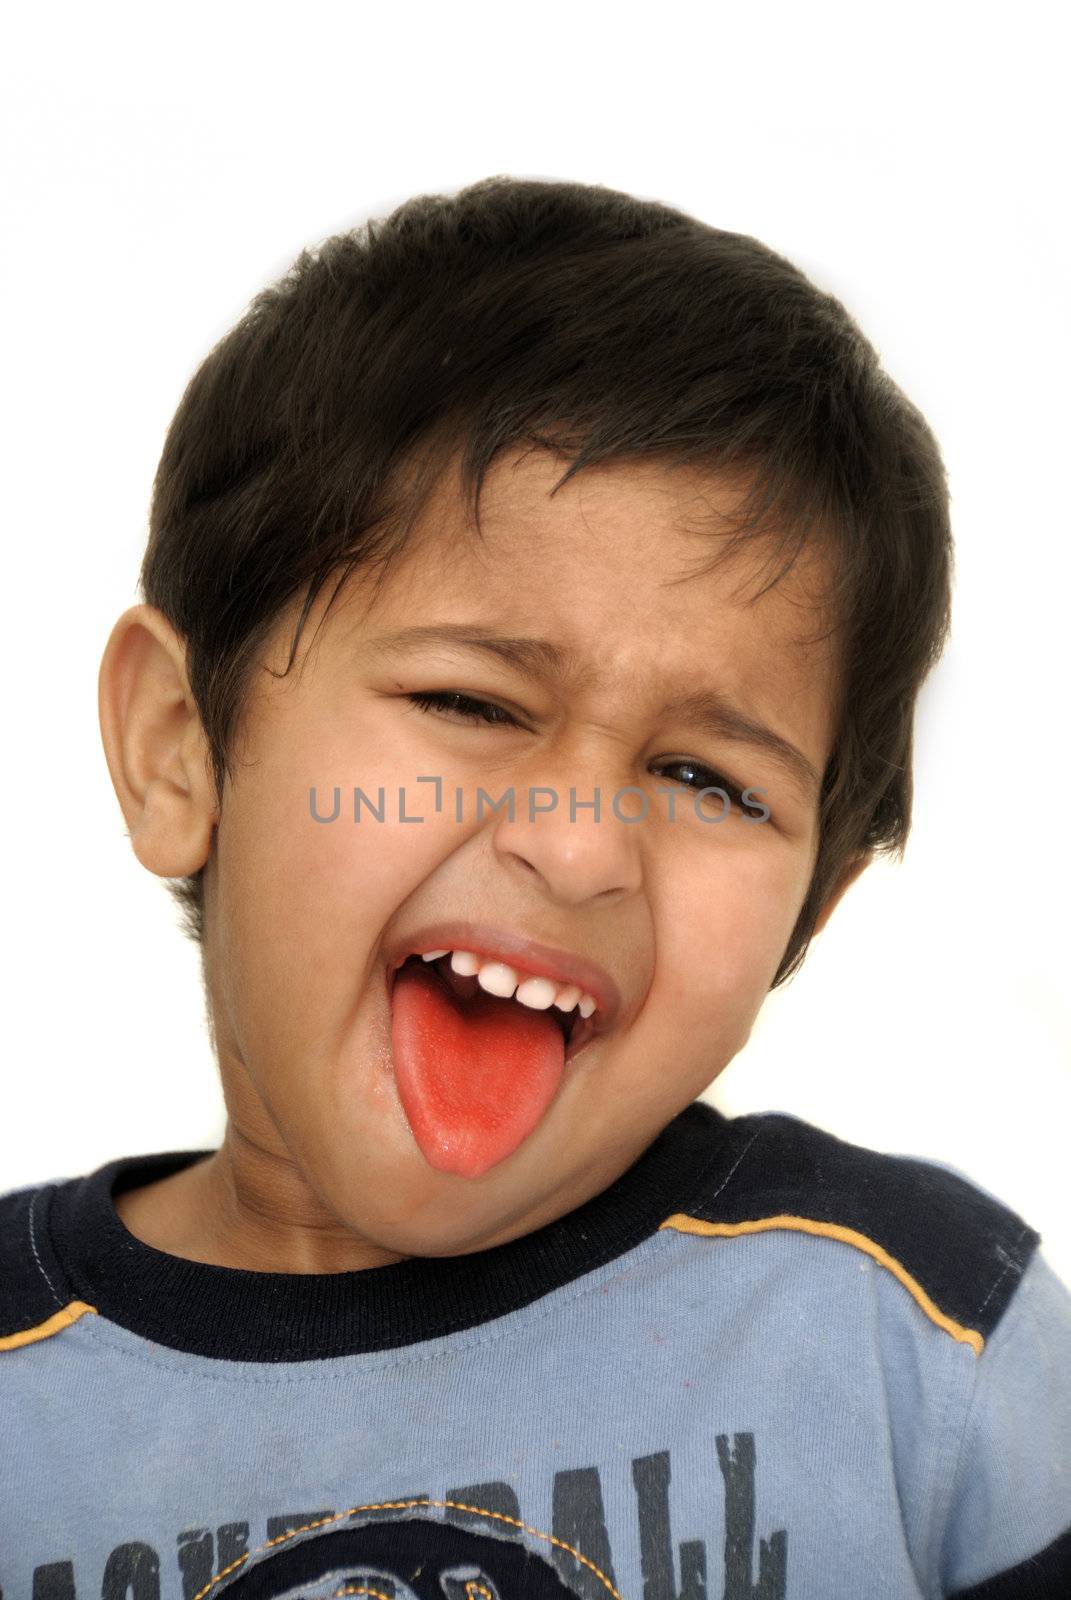 An handsome Indian kid looking very animated